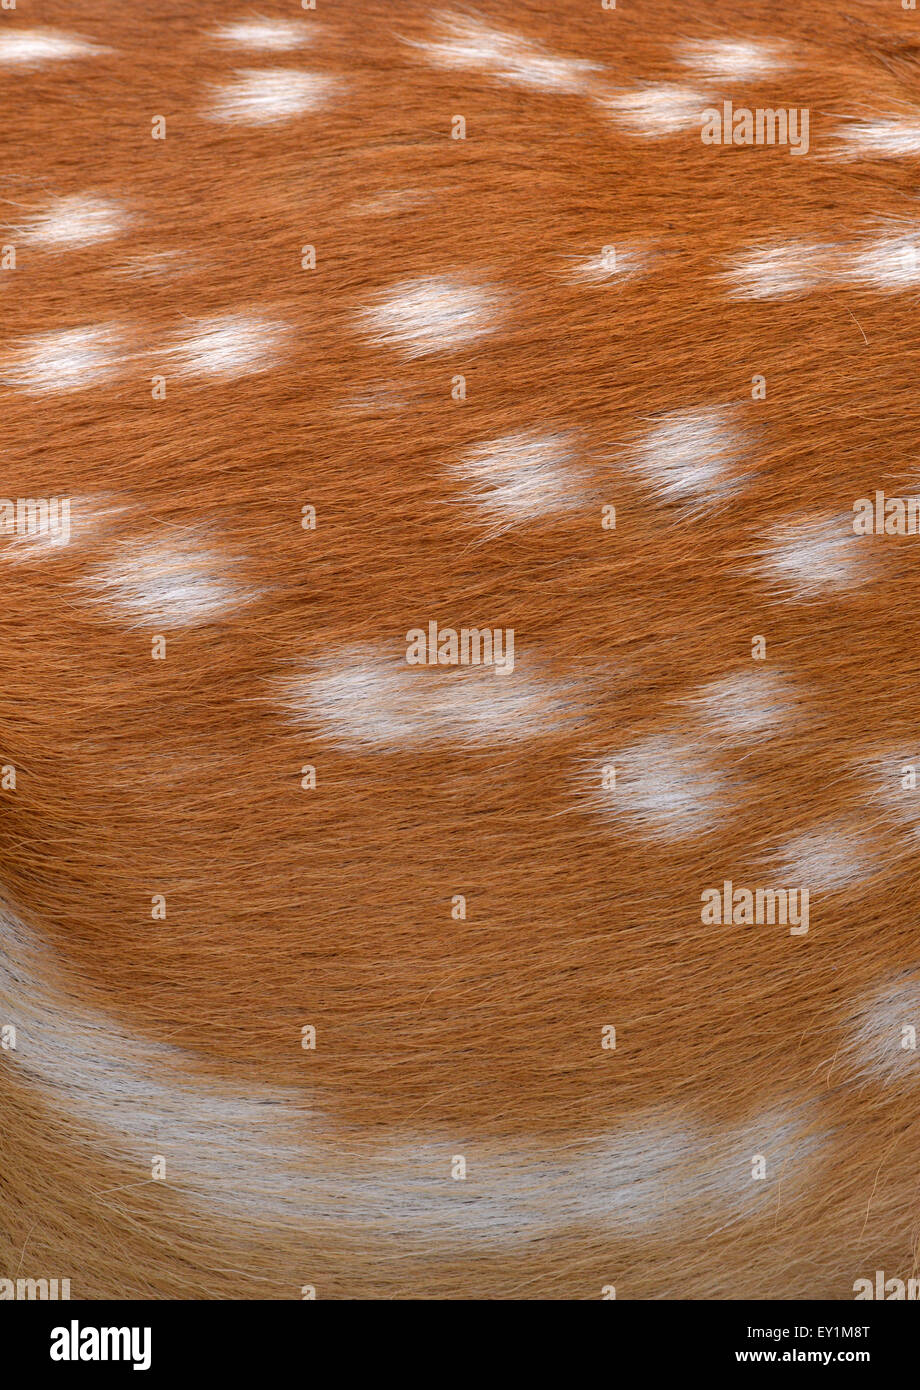 textured of nyala fur can use for background Stock Photo